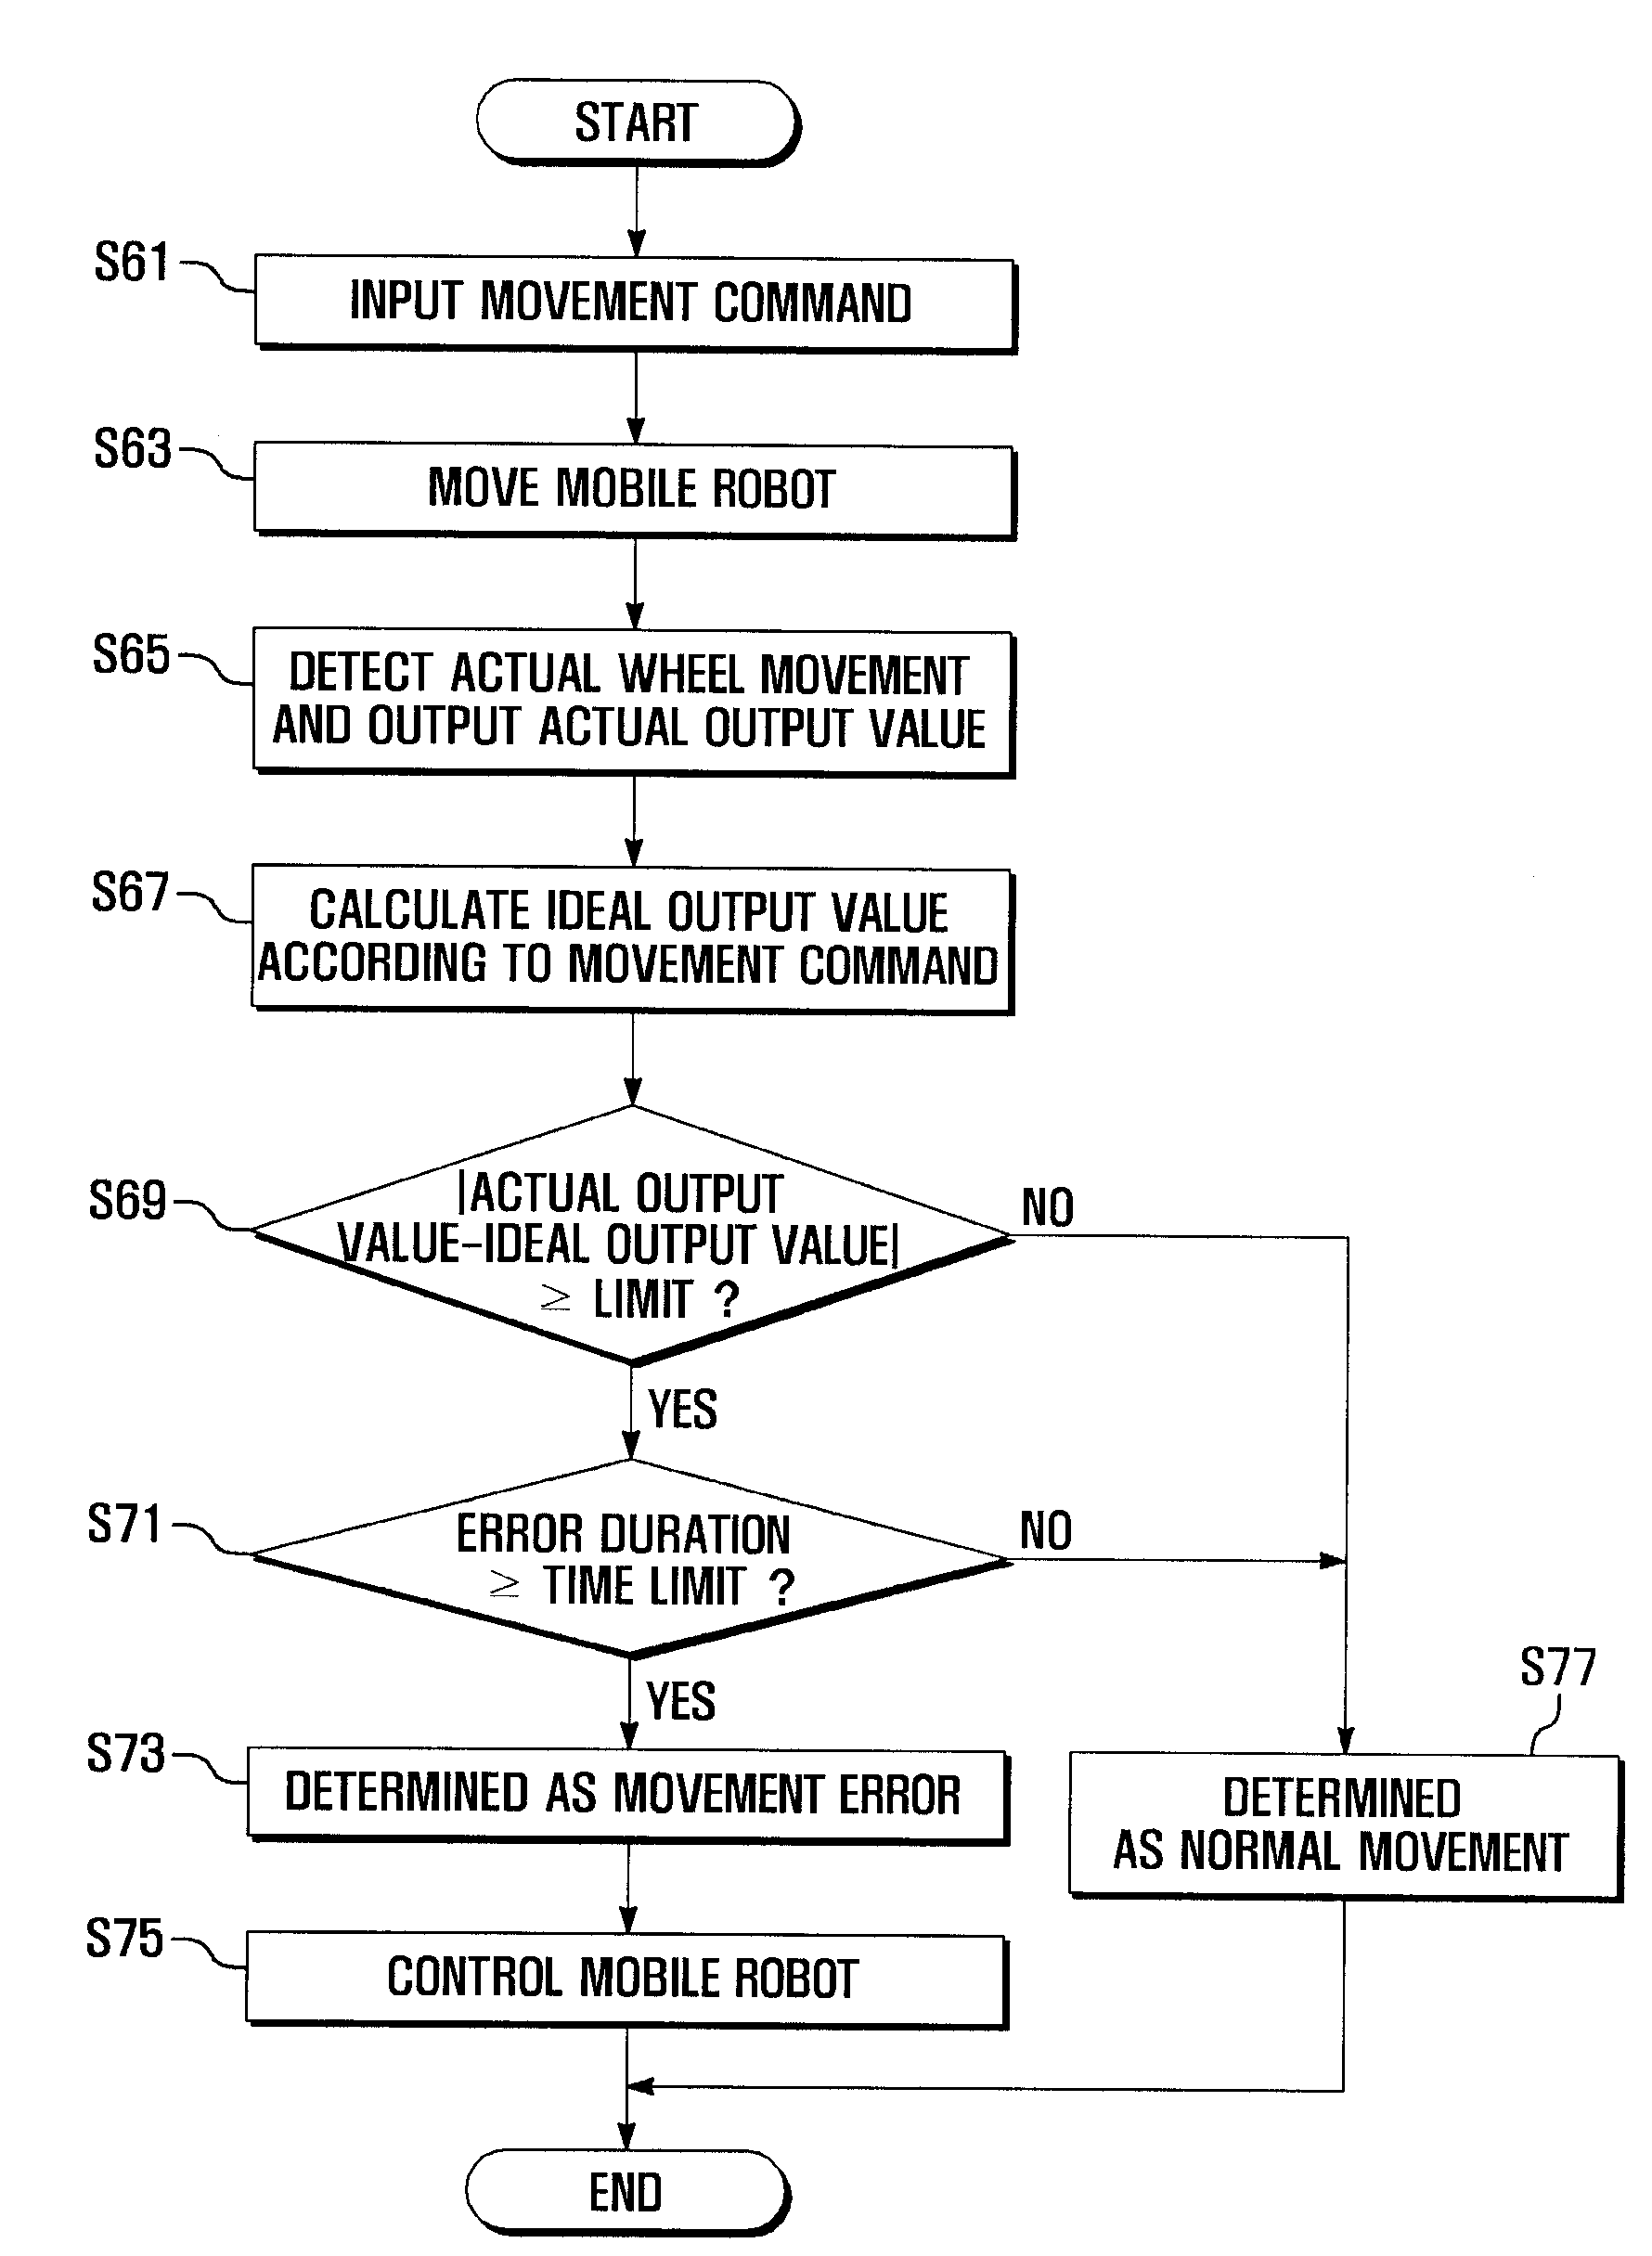 Method and apparatus for detecting movement error in mobile robot